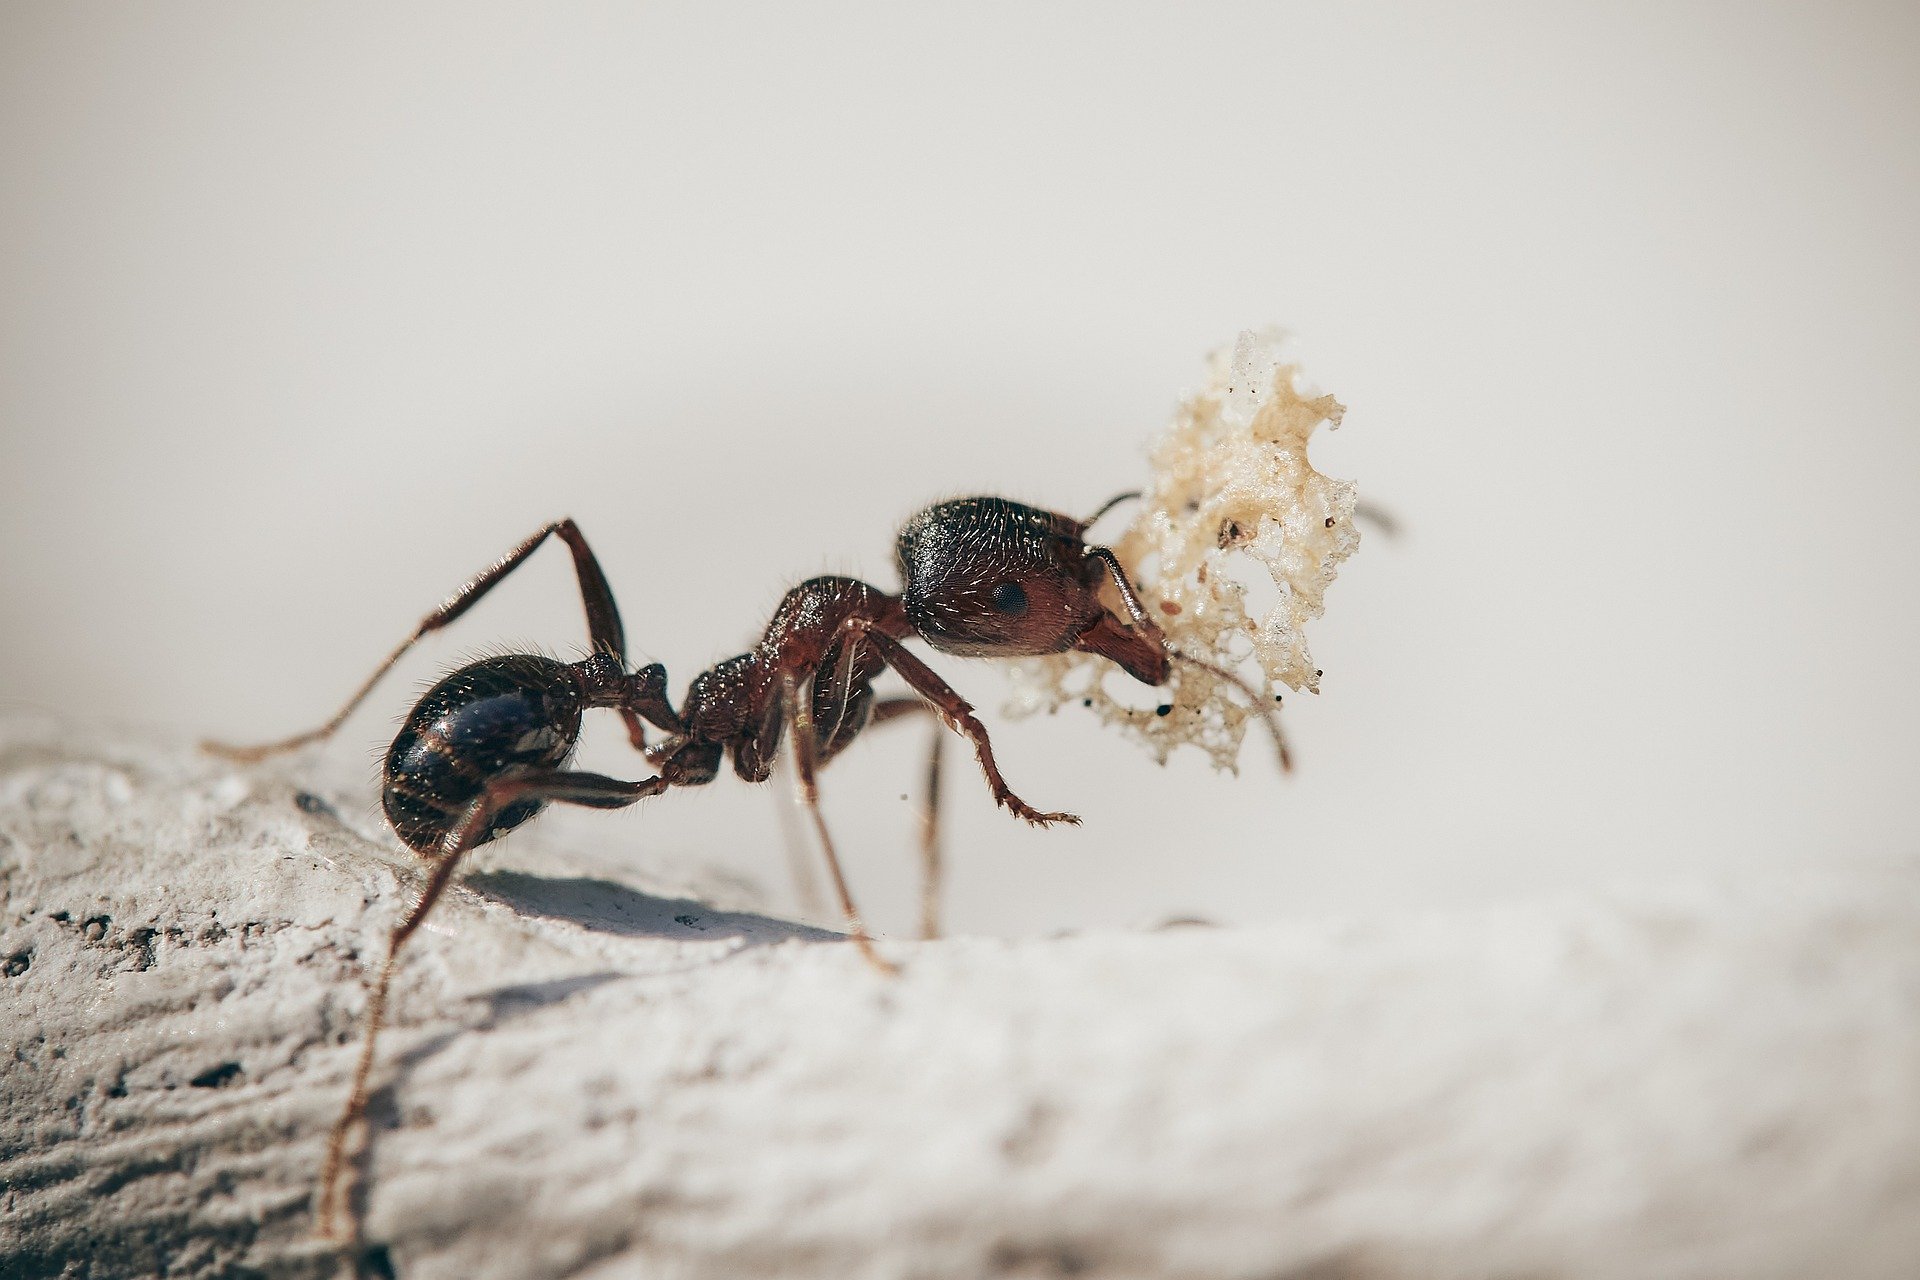 Common types of ants you can find in houses